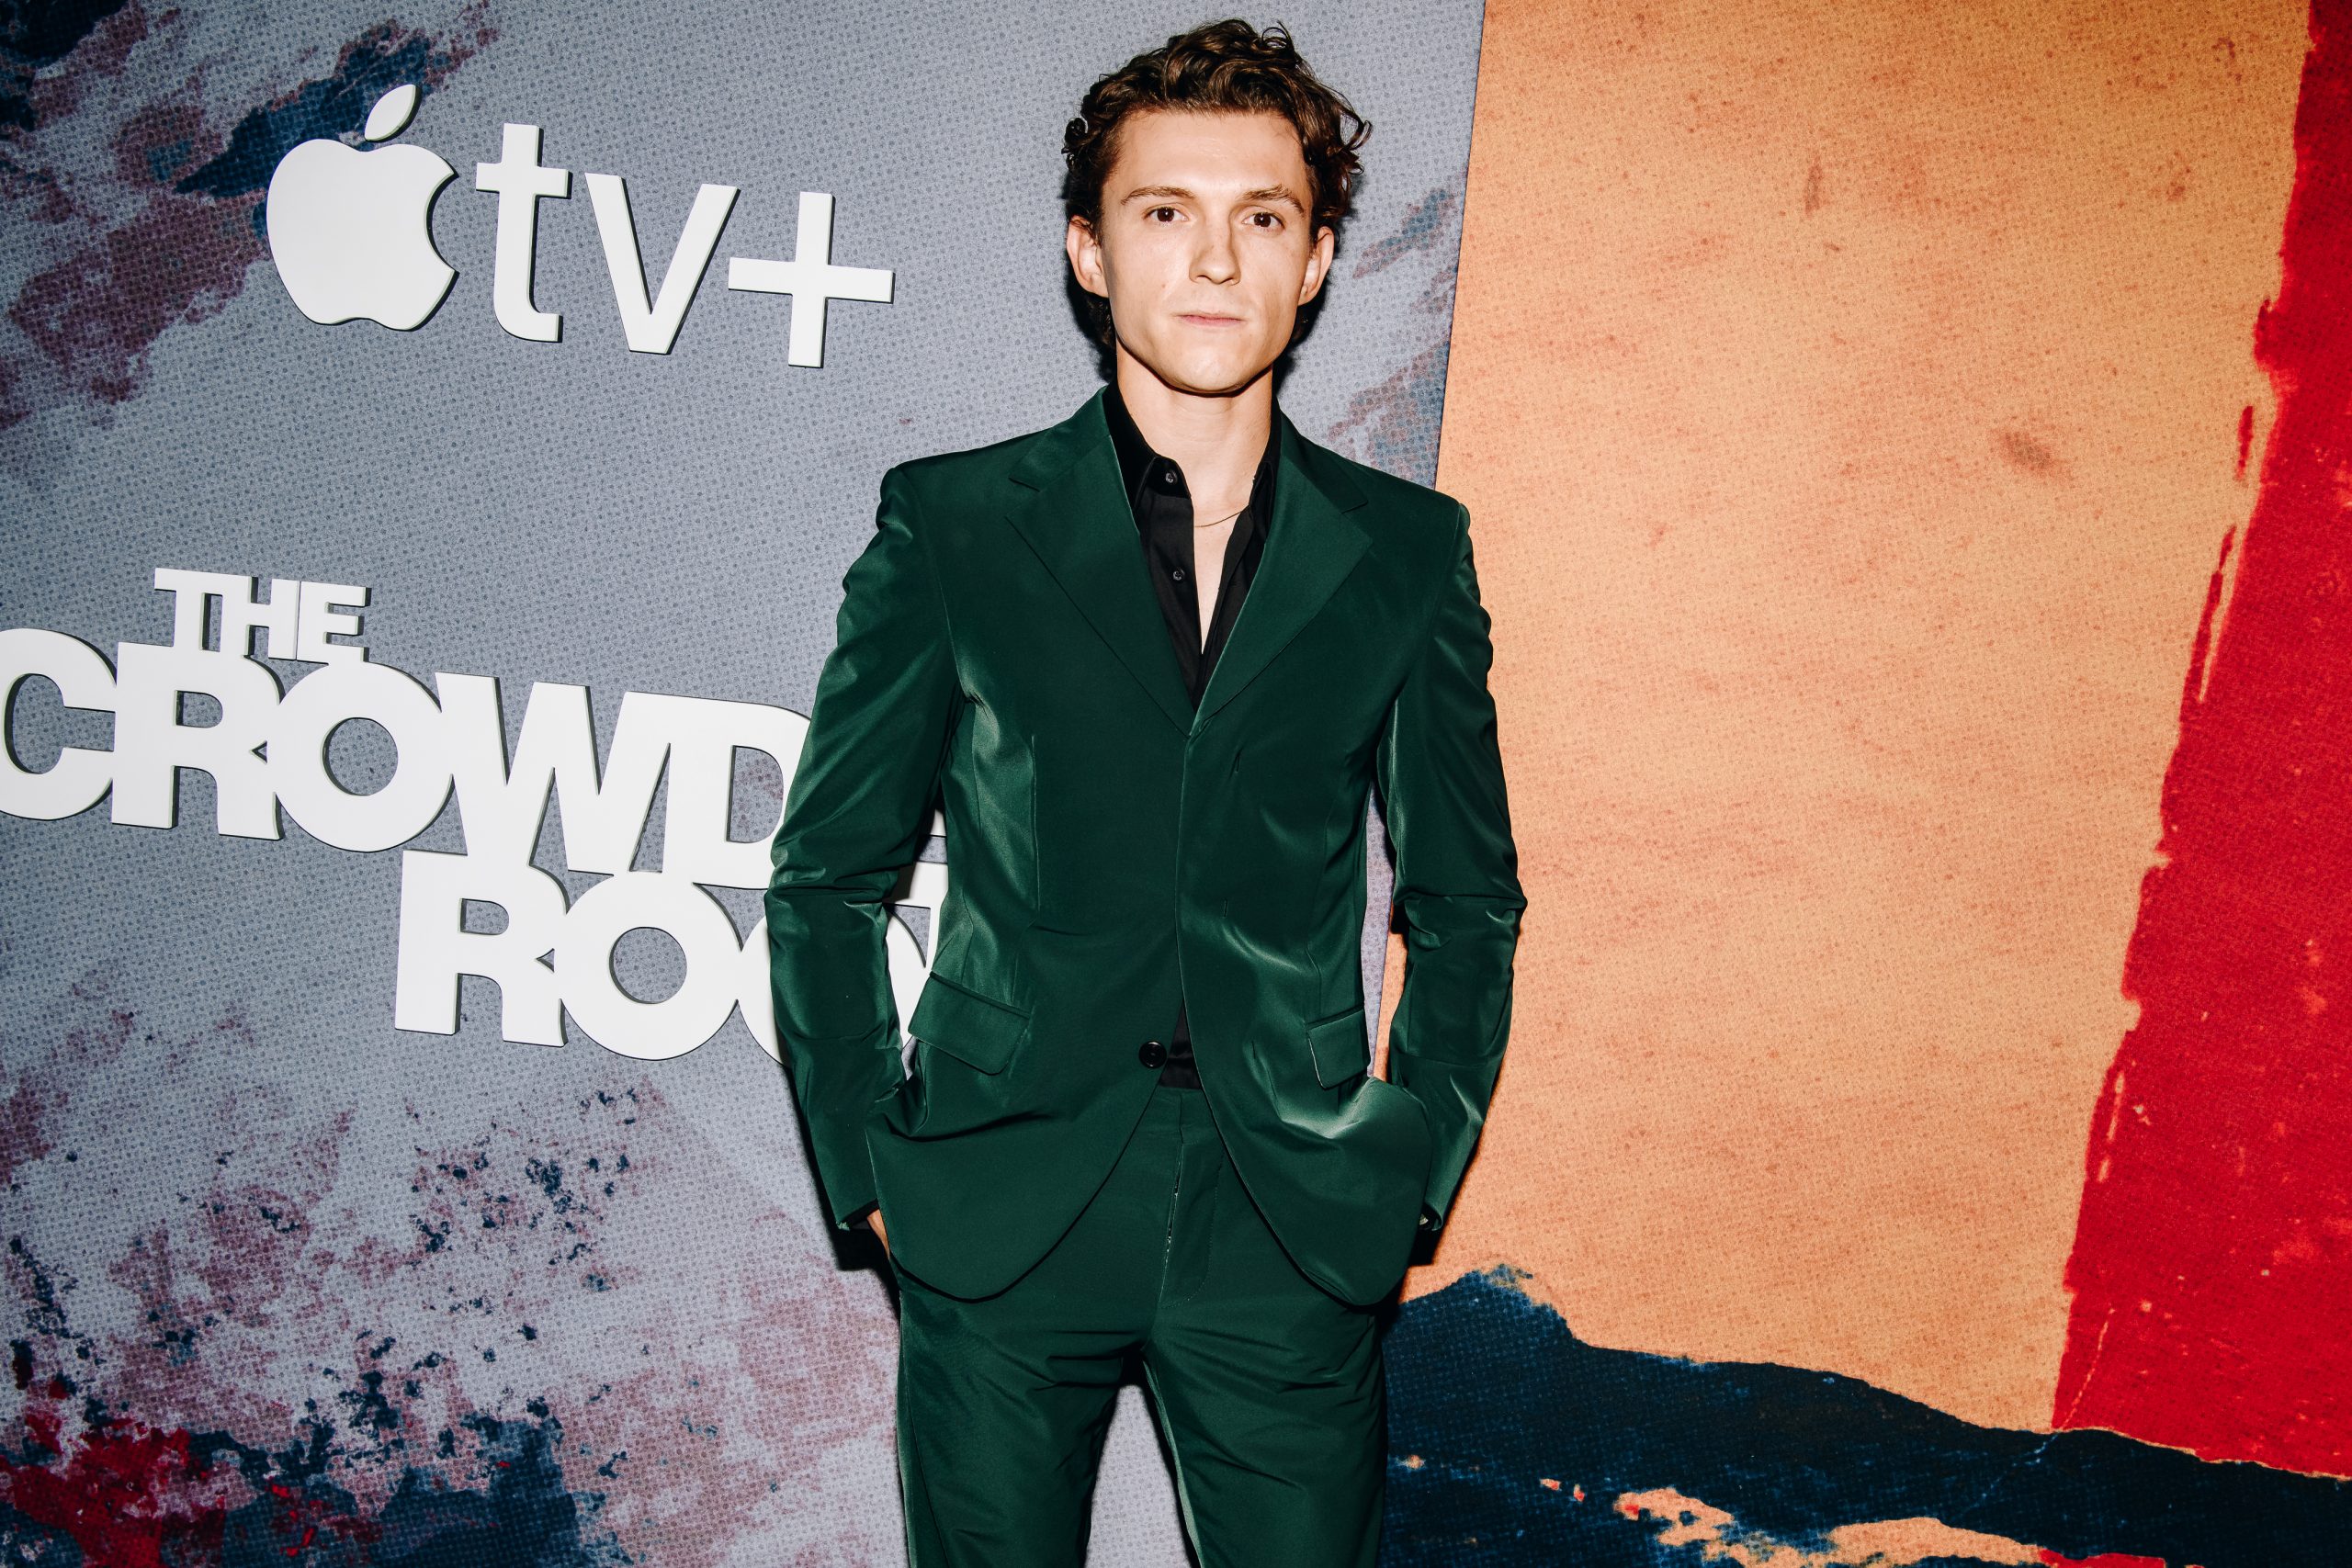 Tom Holland at the premiere of "The Crowded Room"